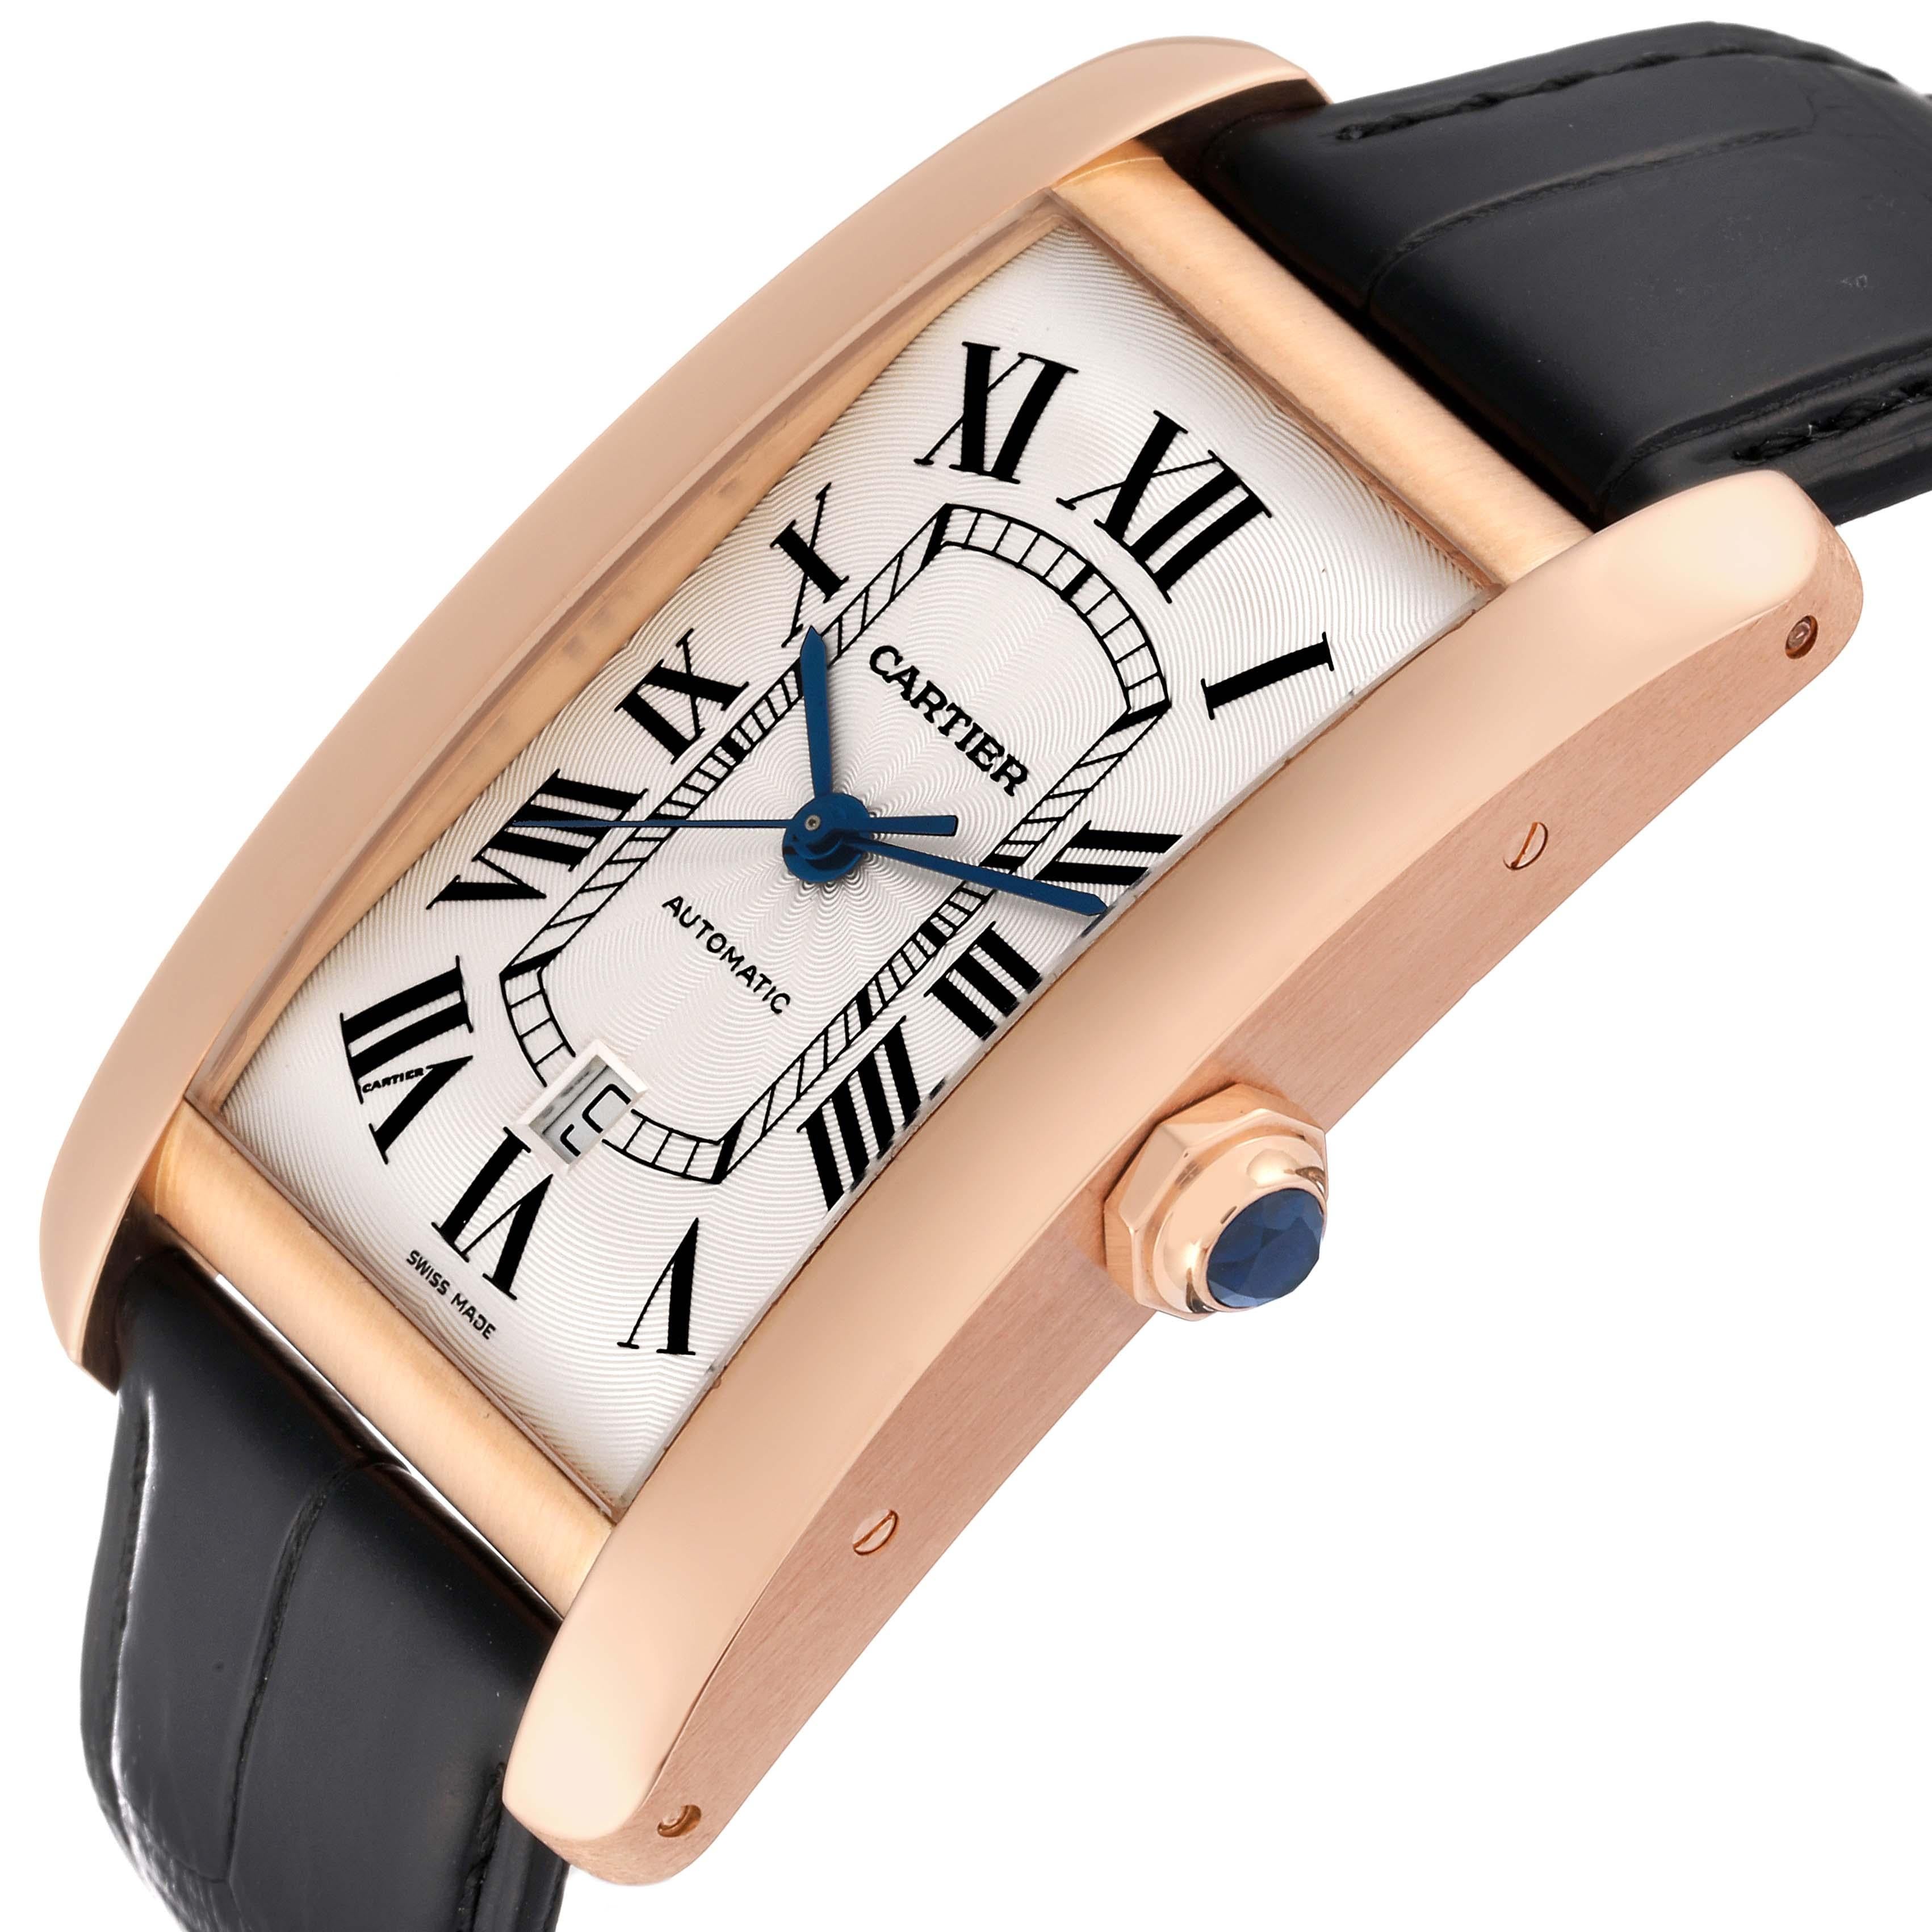 Cartier Tank Americaine XL Rose Gold Automatic Mens Watch W2609856. Automatic self-winding movement. 18K rose gold case 52 mm x 31 mm.  Octagonal crown set with faceted blue sapphire. Transparent exhibition sapphire crystal caseback. . Scratch